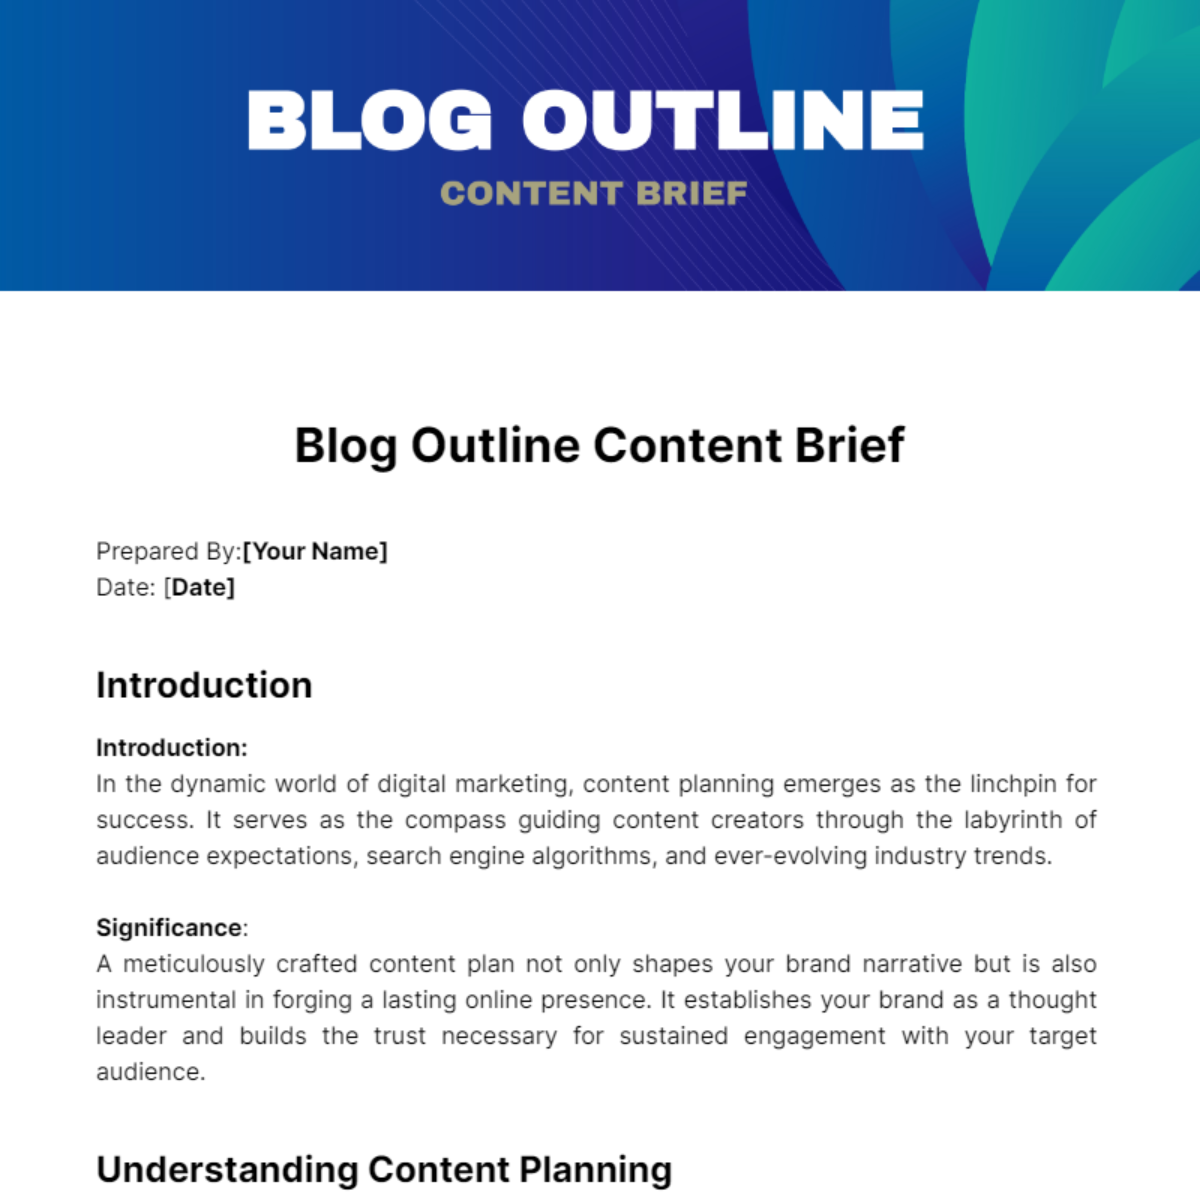 Blog Outline Content Brief Template